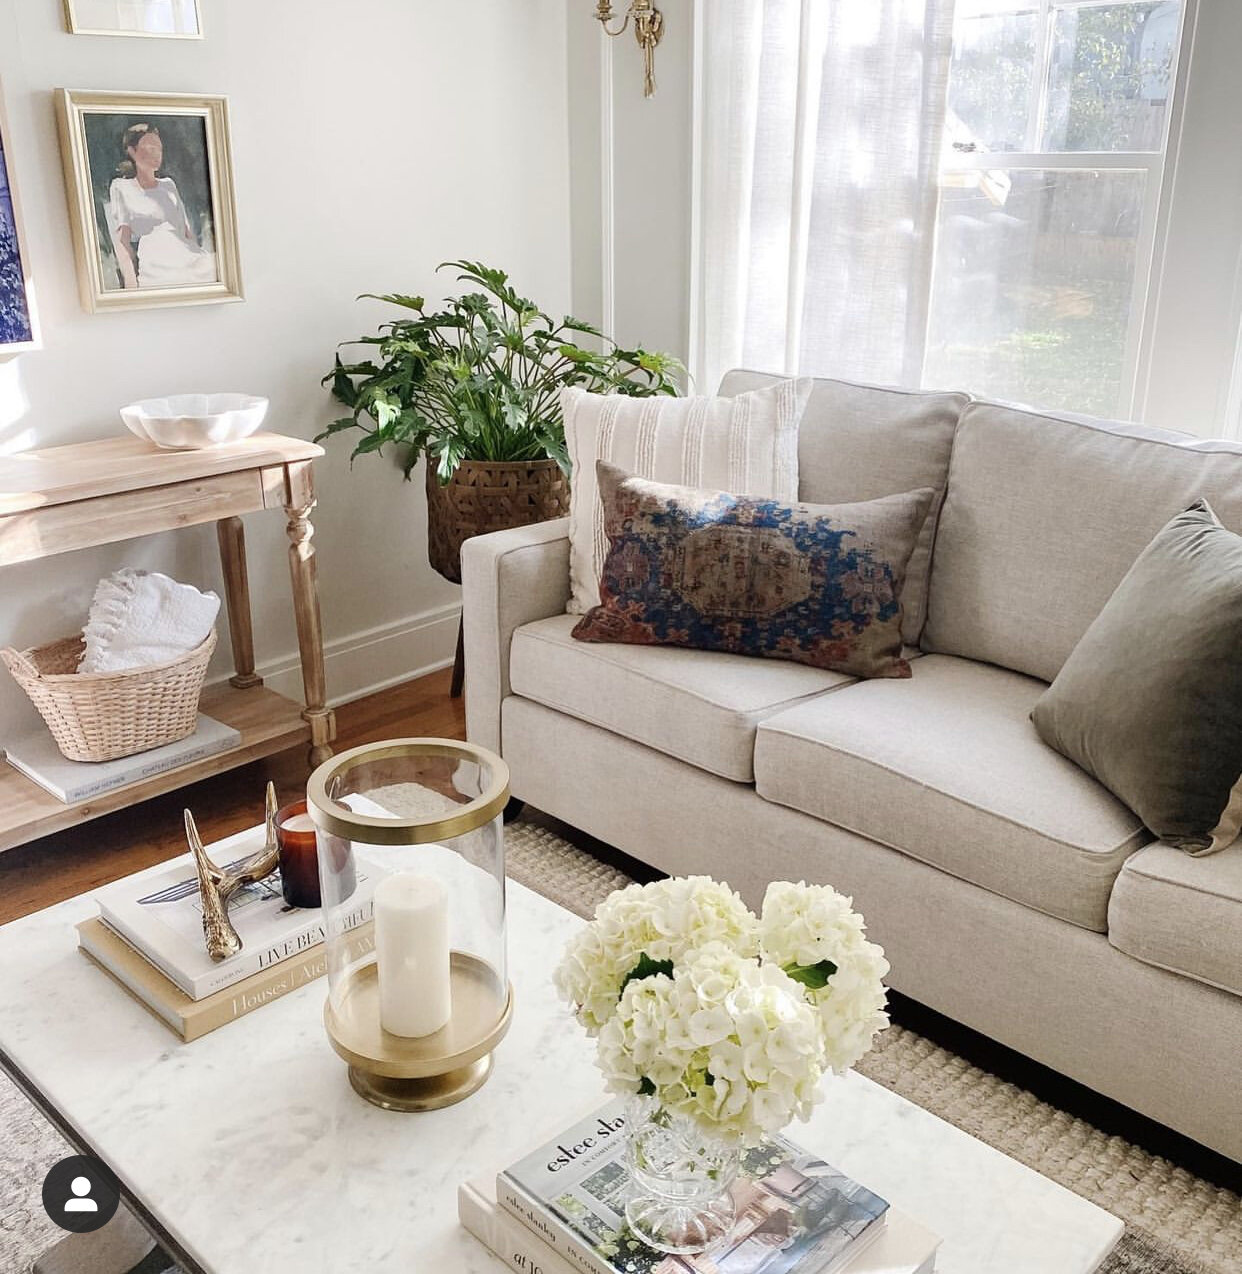 Decorative Pillows  - Pillows can instantly change the look of your room. I like to invest in basic ones I can use throughout the year. Then I will add in a few fun pieces depending on the season. I love to look for pillows on ETSY, Serene & Lily, and Pottery Barn.